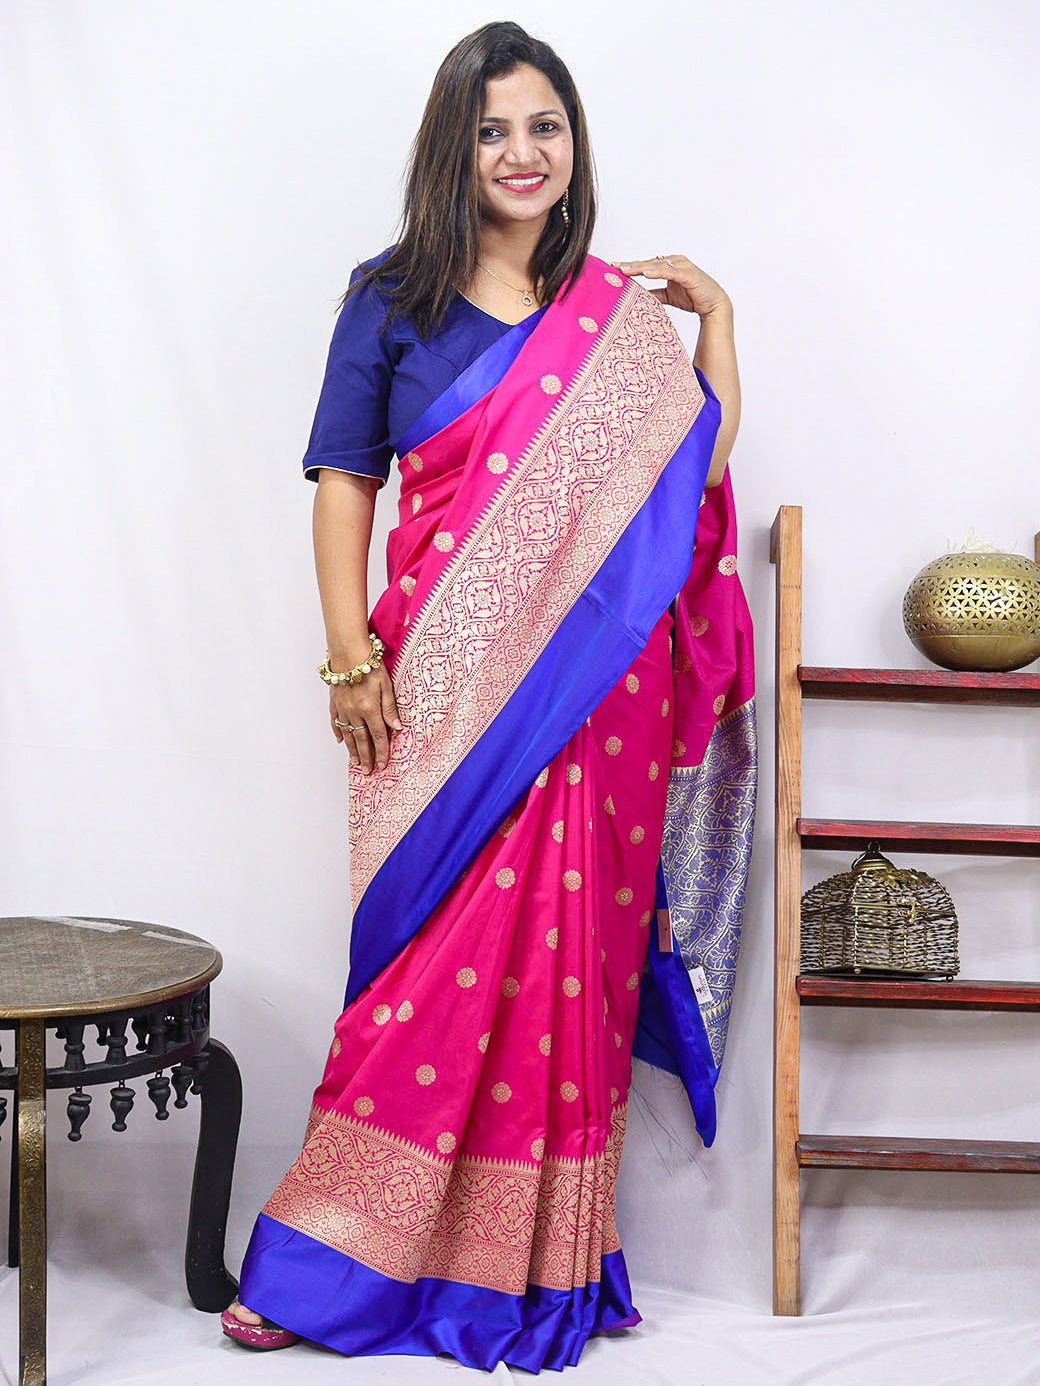 Shop Now for Pink Handloom Banarasi Soft Silk Saree with Contrast Border - Latest Collection - Luxurion World